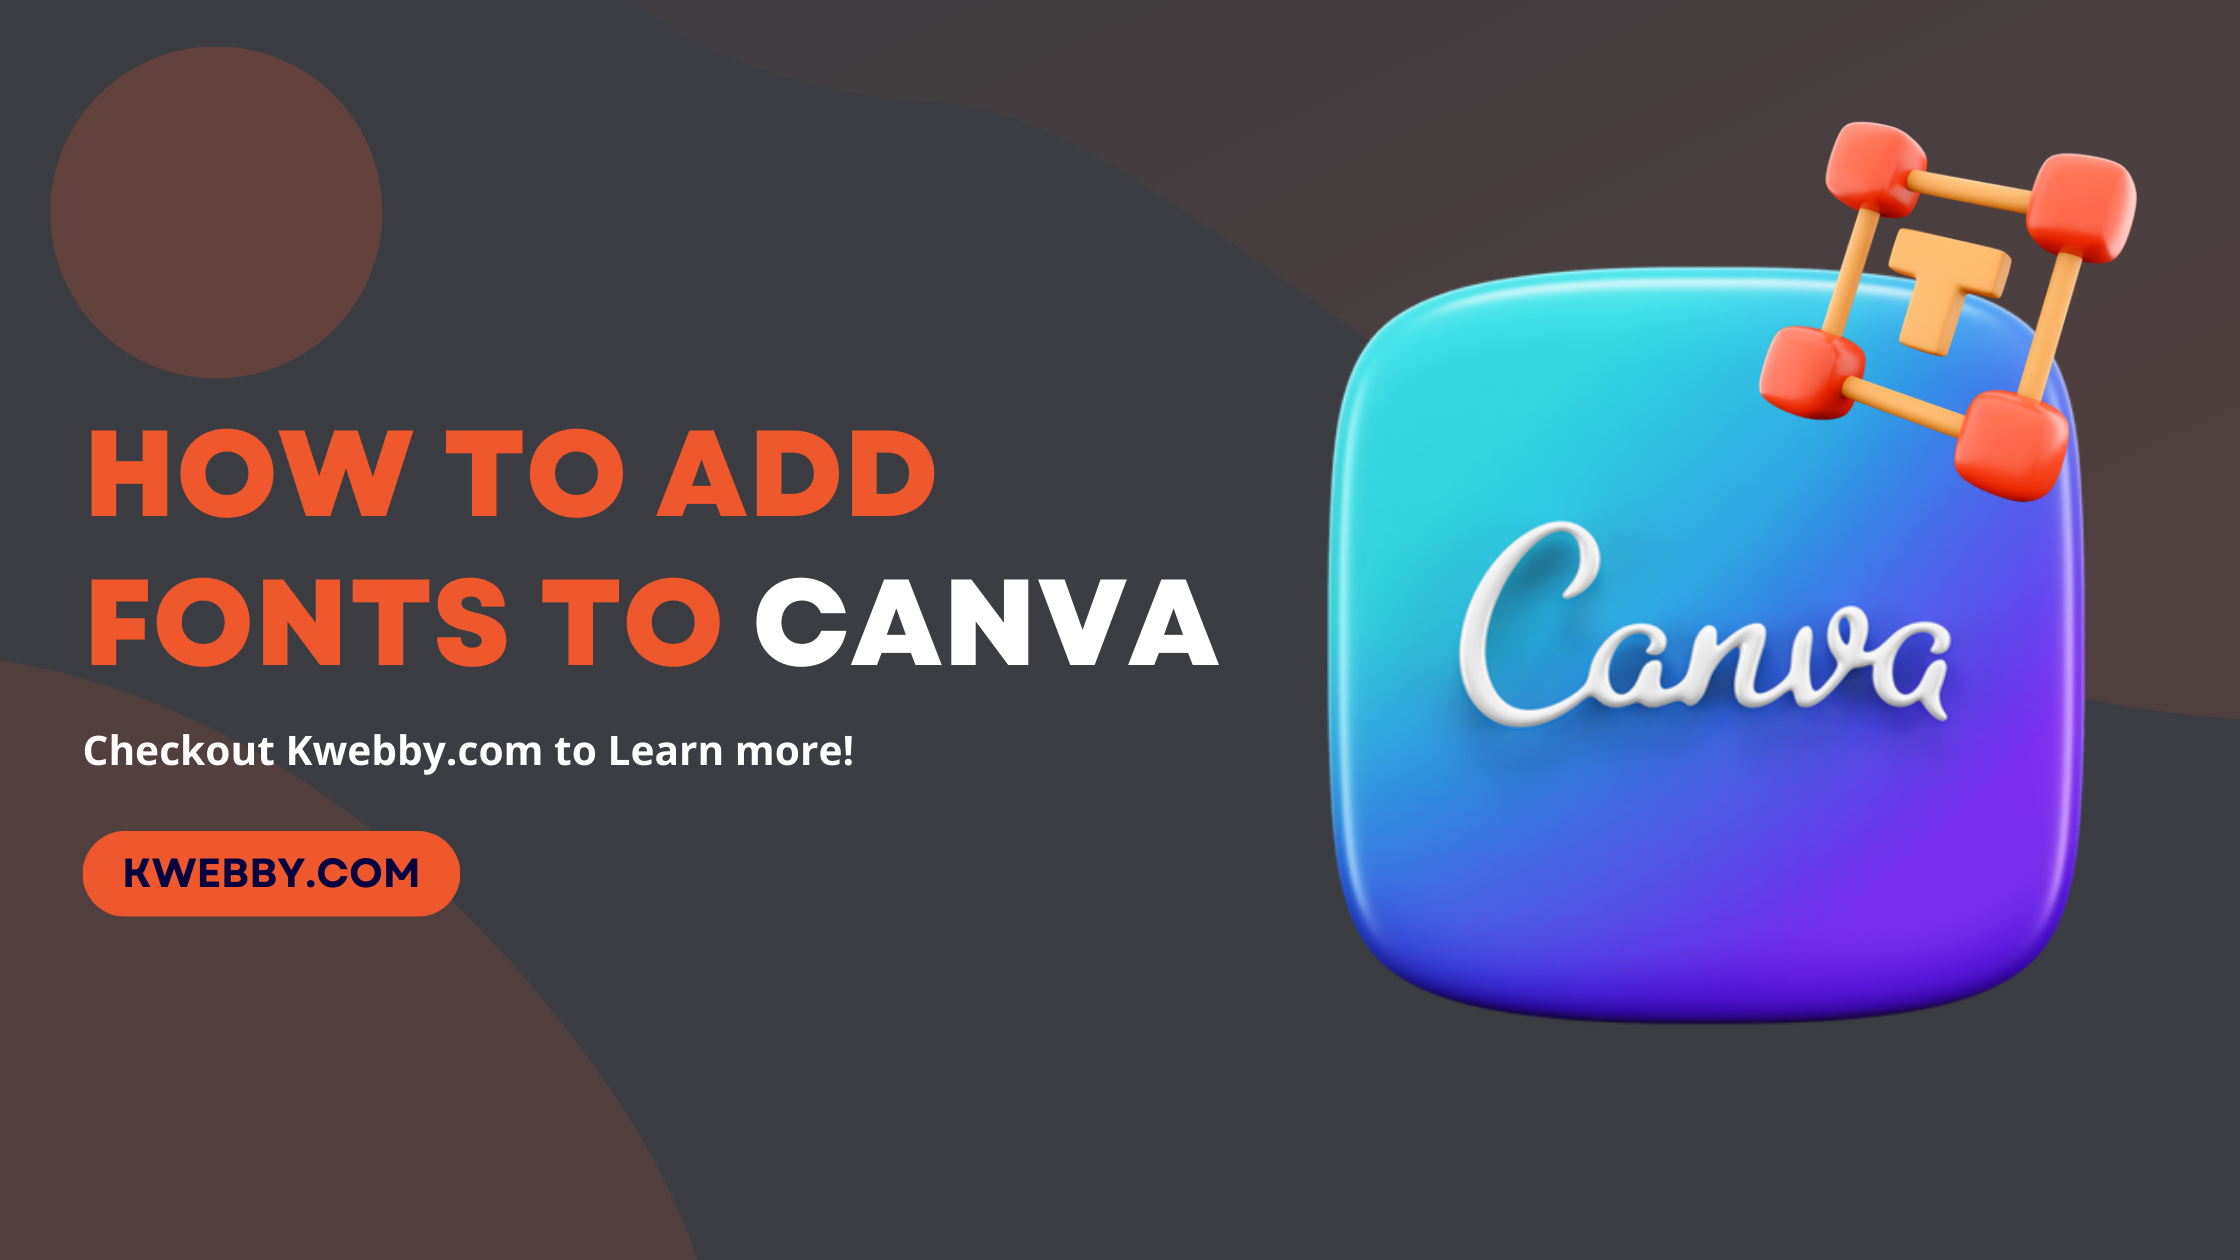 How to Add Fonts to Canva (2 Easy Methods)